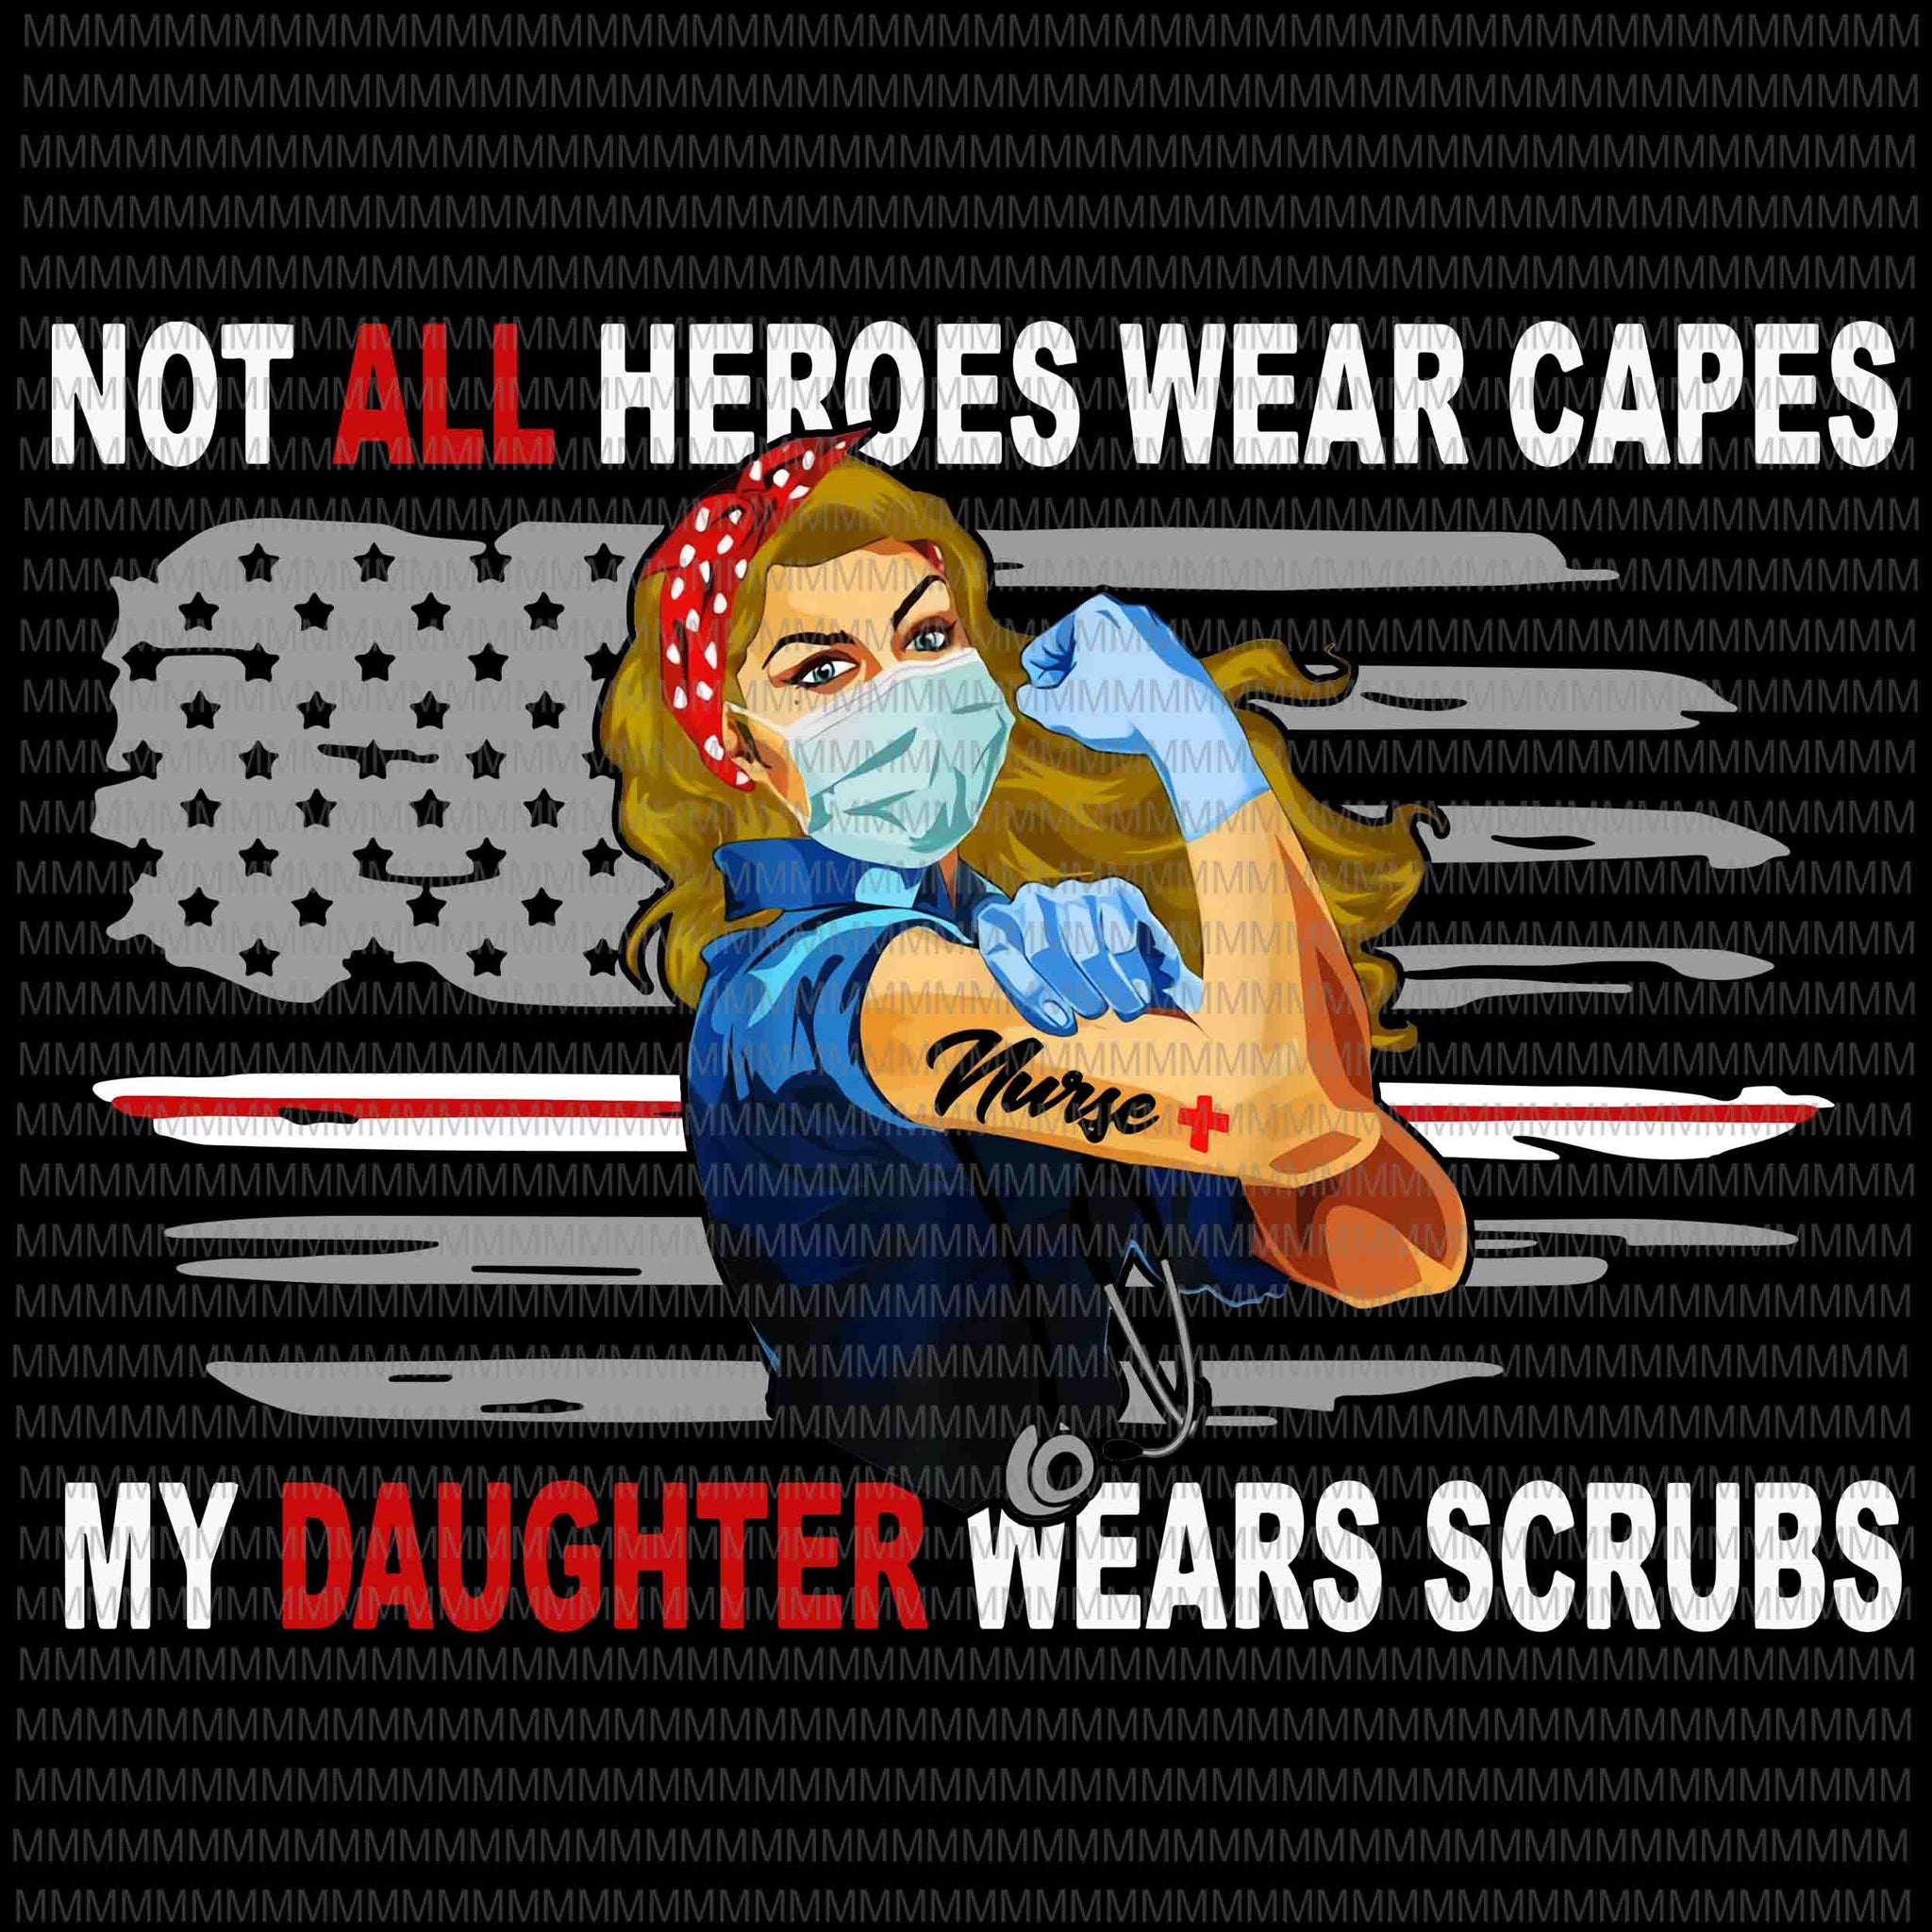 Nurses vector, Not All Heroes Wear Capes My Daughter Wear Scrubs vector, Png, Jpg, flag usa svg, heart usa Png, Jpg graphic t-shirt design